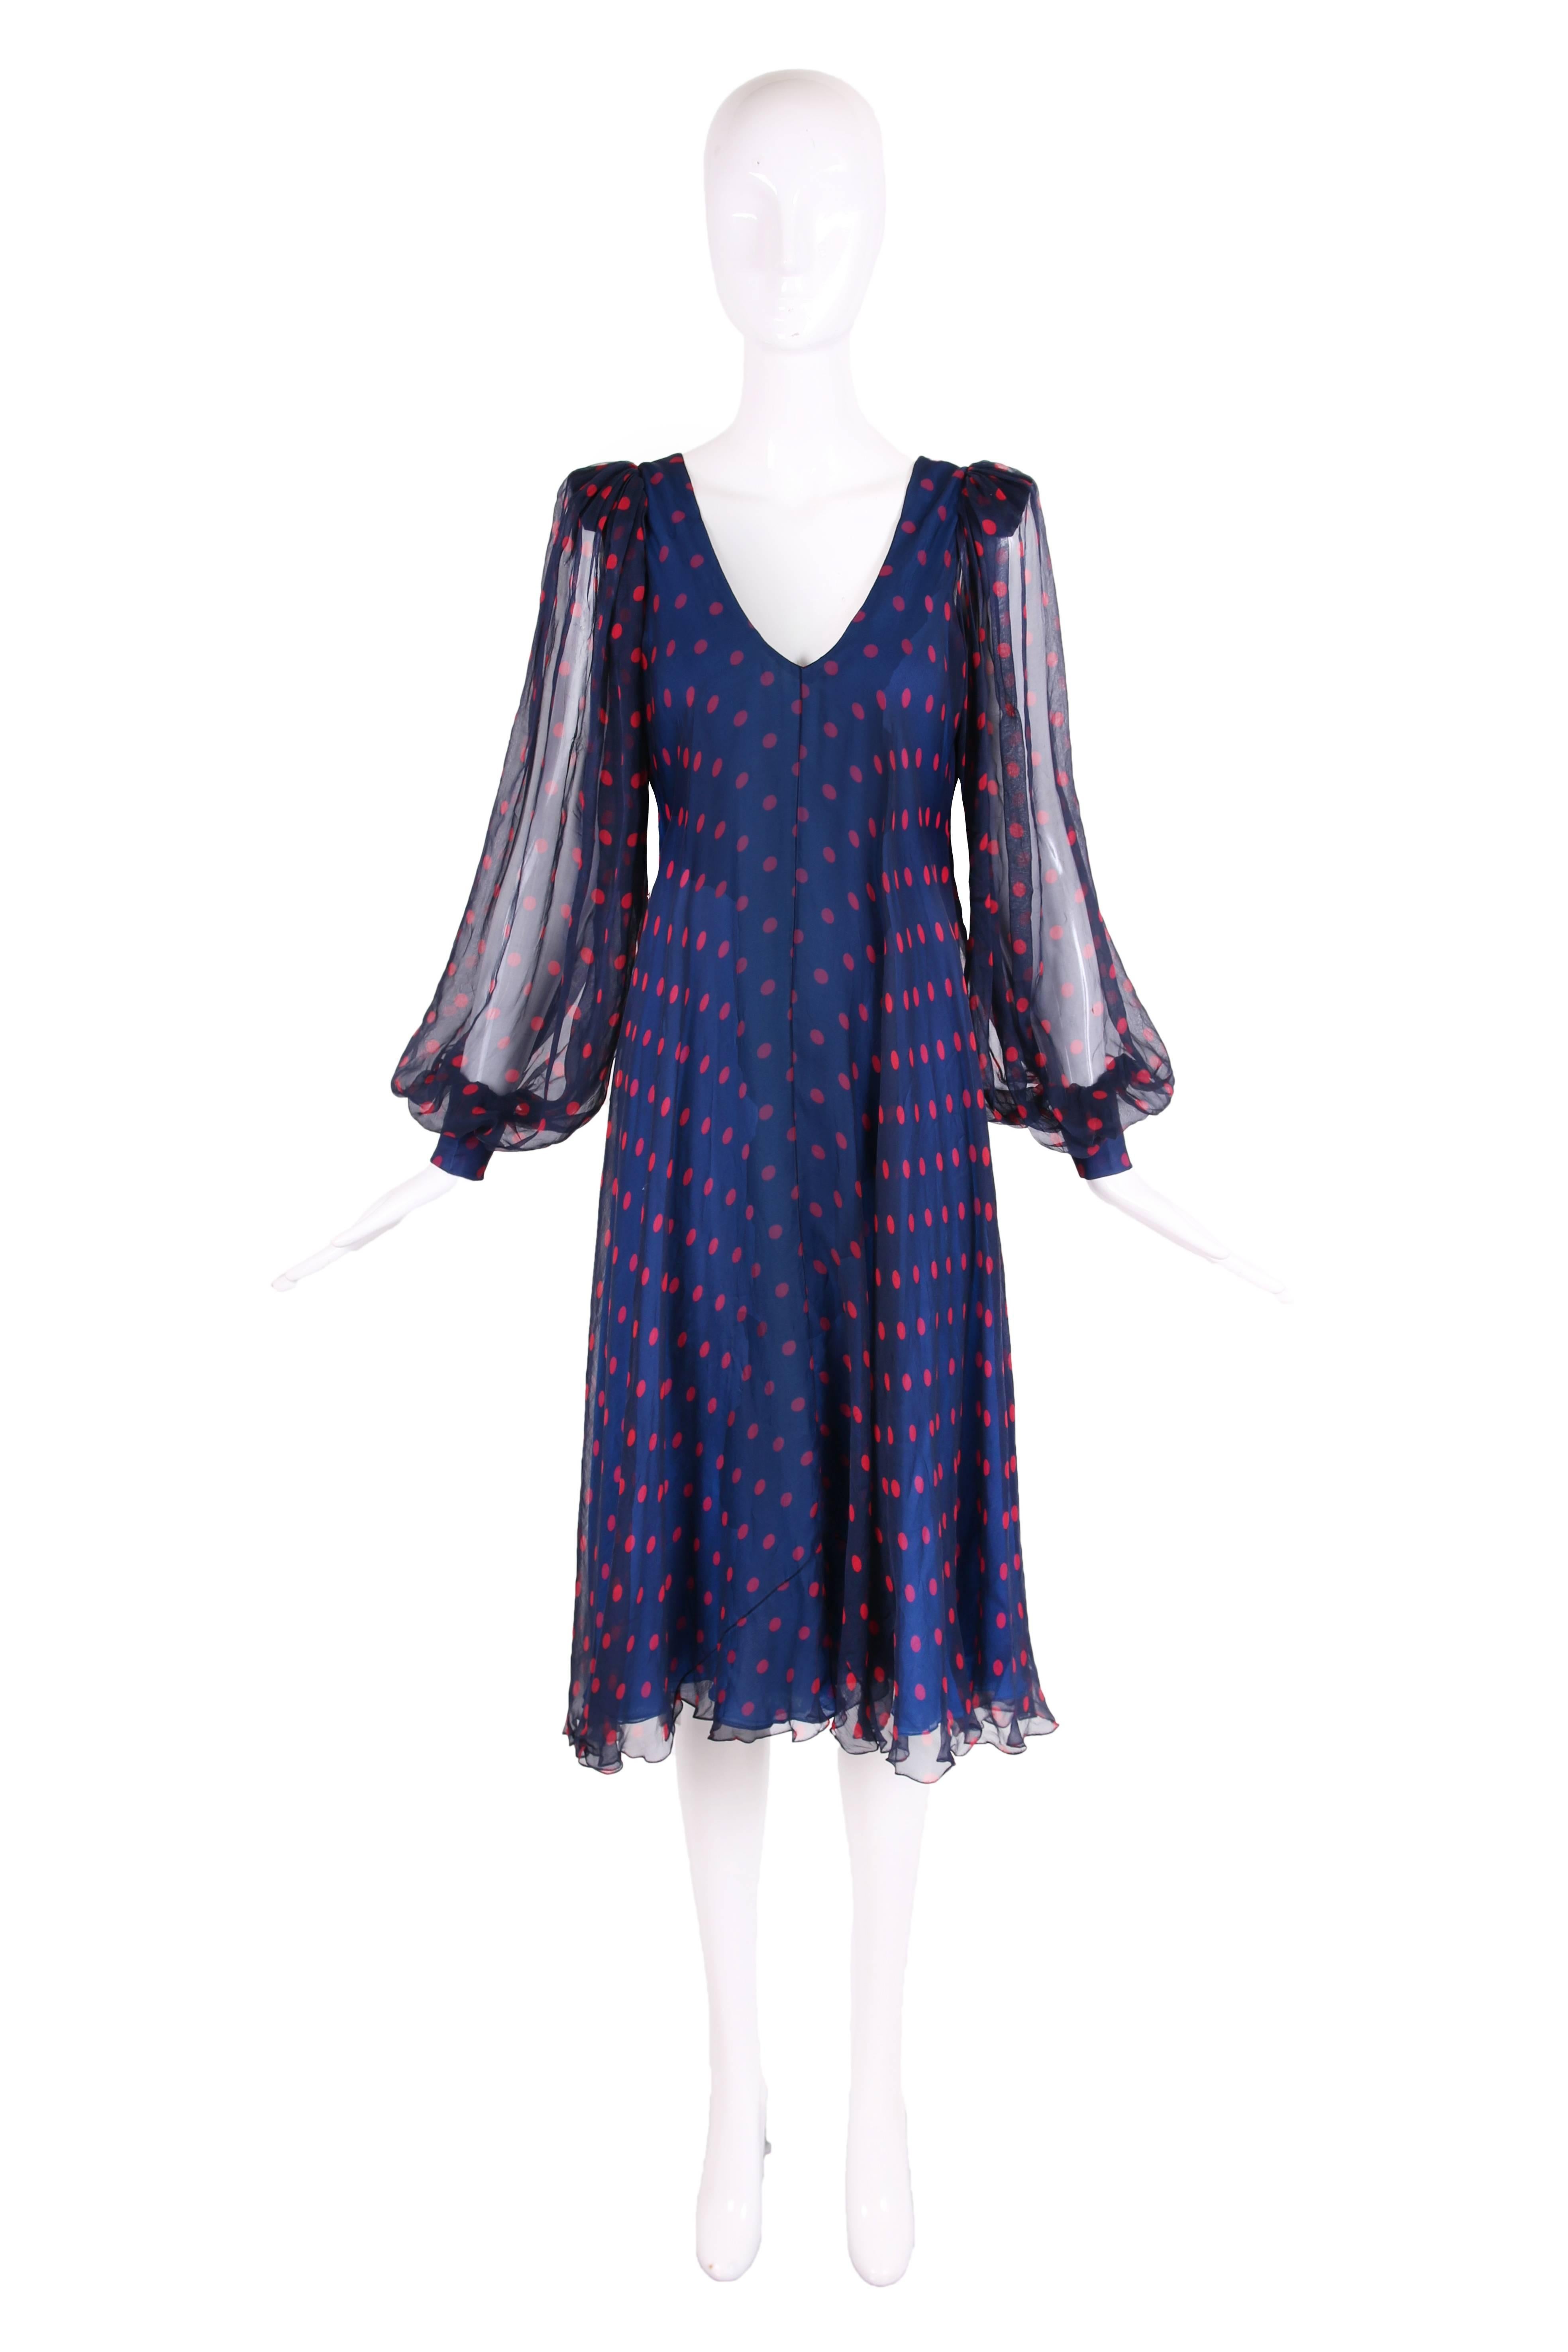 1970's Stavropoulos navy blue silk chiffon multi-layered cocktail dress with red polka-dots throughout. This dress is cut on the bias, has a V-neckline at front and back and features sheer over-sized balloon sleeves and three layers of bright blue